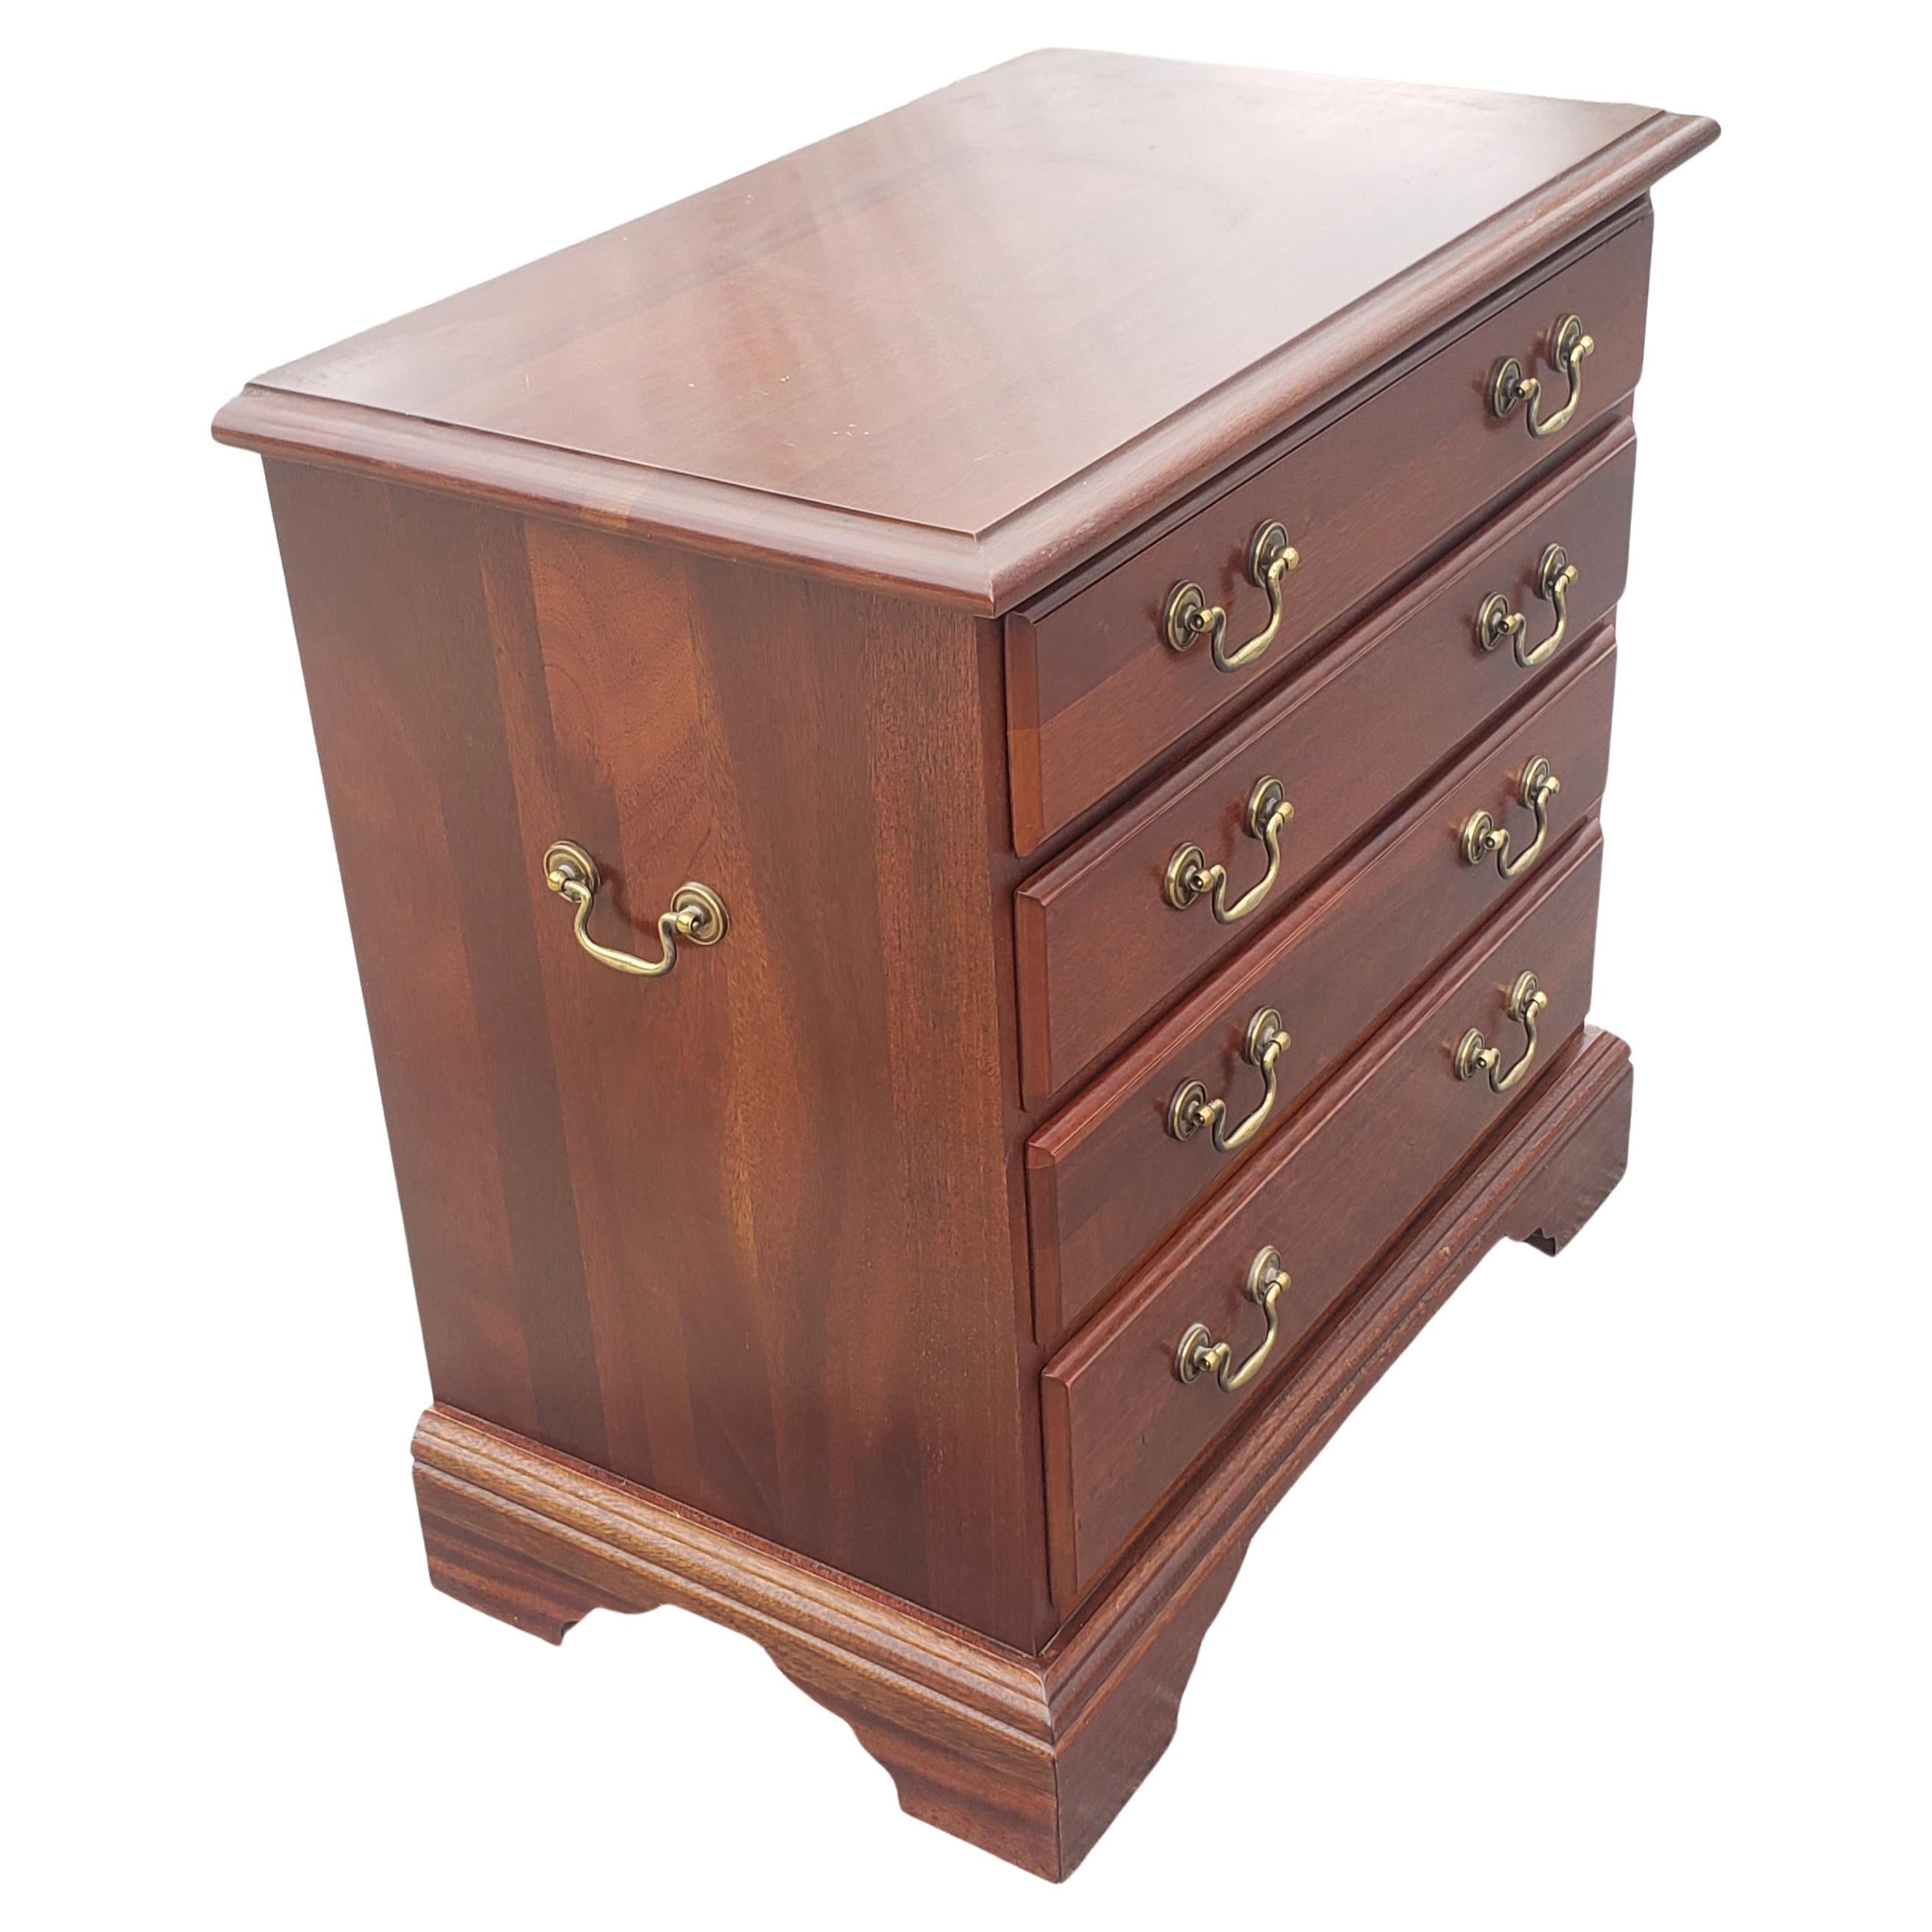 Chippendale 4-Drawer Mahogany Bedside Commode Chest of Drawers